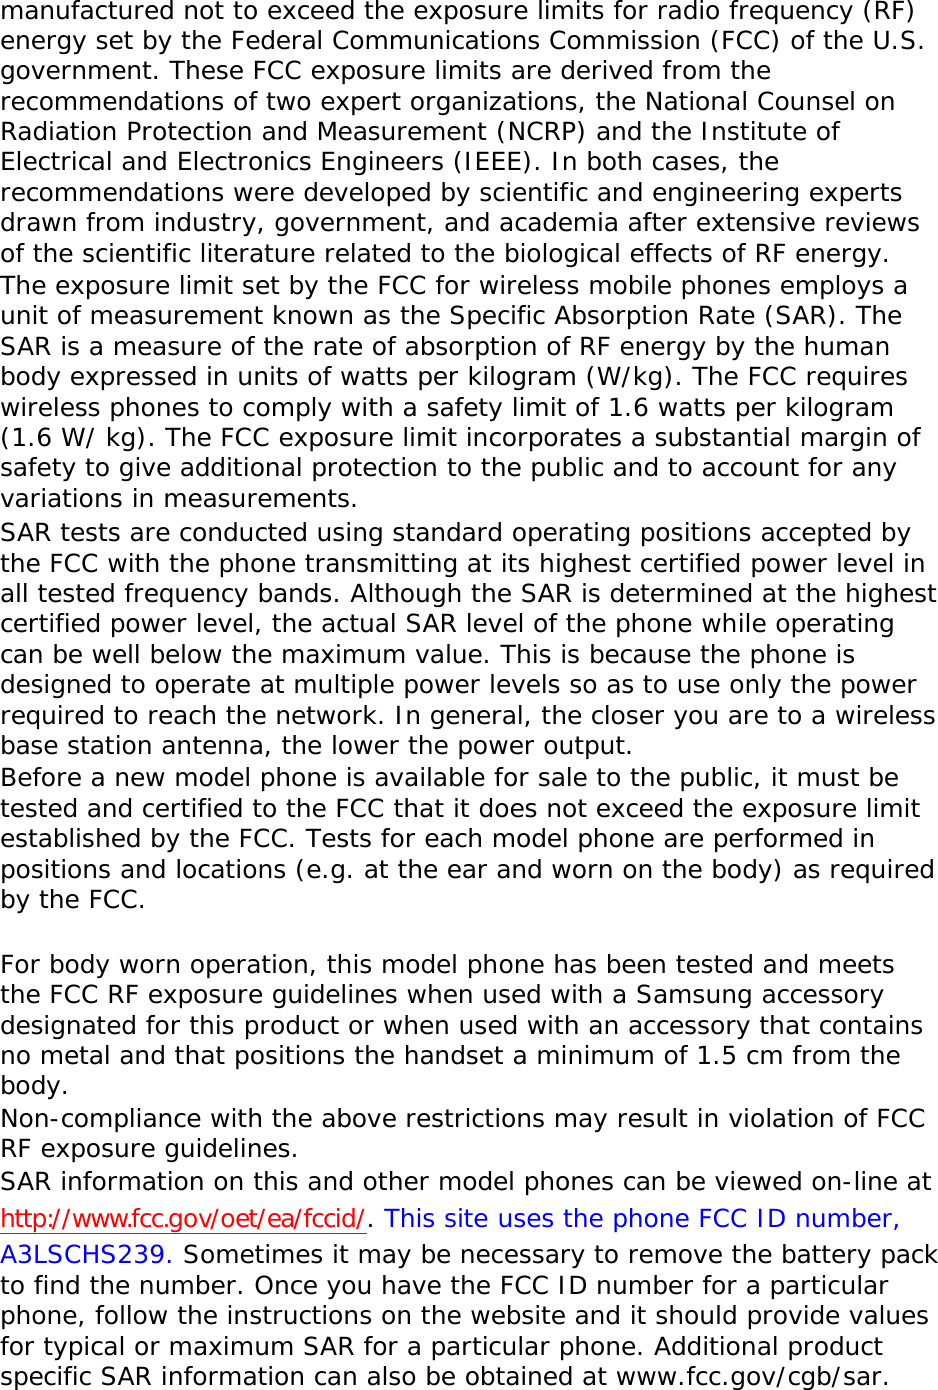 manufactured not to exceed the exposure limits for radio frequency (RF) energy set by the Federal Communications Commission (FCC) of the U.S. government. These FCC exposure limits are derived from the recommendations of two expert organizations, the National Counsel on Radiation Protection and Measurement (NCRP) and the Institute of Electrical and Electronics Engineers (IEEE). In both cases, the recommendations were developed by scientific and engineering experts drawn from industry, government, and academia after extensive reviews of the scientific literature related to the biological effects of RF energy. The exposure limit set by the FCC for wireless mobile phones employs a unit of measurement known as the Specific Absorption Rate (SAR). The SAR is a measure of the rate of absorption of RF energy by the human body expressed in units of watts per kilogram (W/kg). The FCC requires wireless phones to comply with a safety limit of 1.6 watts per kilogram (1.6 W/ kg). The FCC exposure limit incorporates a substantial margin of safety to give additional protection to the public and to account for any variations in measurements. SAR tests are conducted using standard operating positions accepted by the FCC with the phone transmitting at its highest certified power level in all tested frequency bands. Although the SAR is determined at the highest certified power level, the actual SAR level of the phone while operating can be well below the maximum value. This is because the phone is designed to operate at multiple power levels so as to use only the power required to reach the network. In general, the closer you are to a wireless base station antenna, the lower the power output. Before a new model phone is available for sale to the public, it must be tested and certified to the FCC that it does not exceed the exposure limit established by the FCC. Tests for each model phone are performed in positions and locations (e.g. at the ear and worn on the body) as required by the FCC.    For body worn operation, this model phone has been tested and meets the FCC RF exposure guidelines when used with a Samsung accessory designated for this product or when used with an accessory that contains no metal and that positions the handset a minimum of 1.5 cm from the body.  Non-compliance with the above restrictions may result in violation of FCC RF exposure guidelines. SAR information on this and other model phones can be viewed on-line at http://www.fcc.gov/oet/ea/fccid/. This site uses the phone FCC ID number, A3LSCHS239. Sometimes it may be necessary to remove the battery pack to find the number. Once you have the FCC ID number for a particular phone, follow the instructions on the website and it should provide values for typical or maximum SAR for a particular phone. Additional product specific SAR information can also be obtained at www.fcc.gov/cgb/sar. 